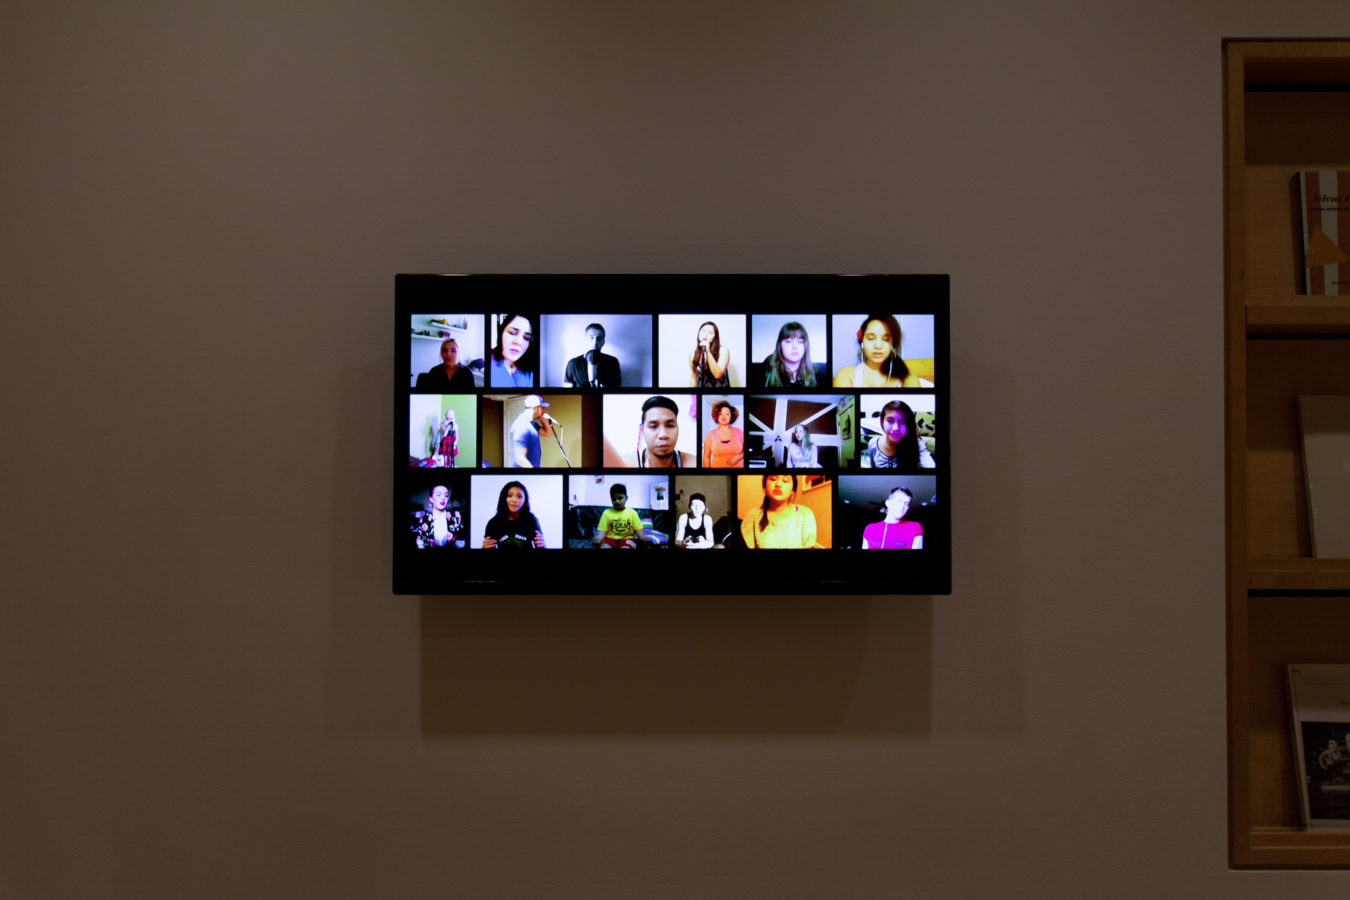 Color image of video work on TV screen depicting multiple people singing on white gallery wall